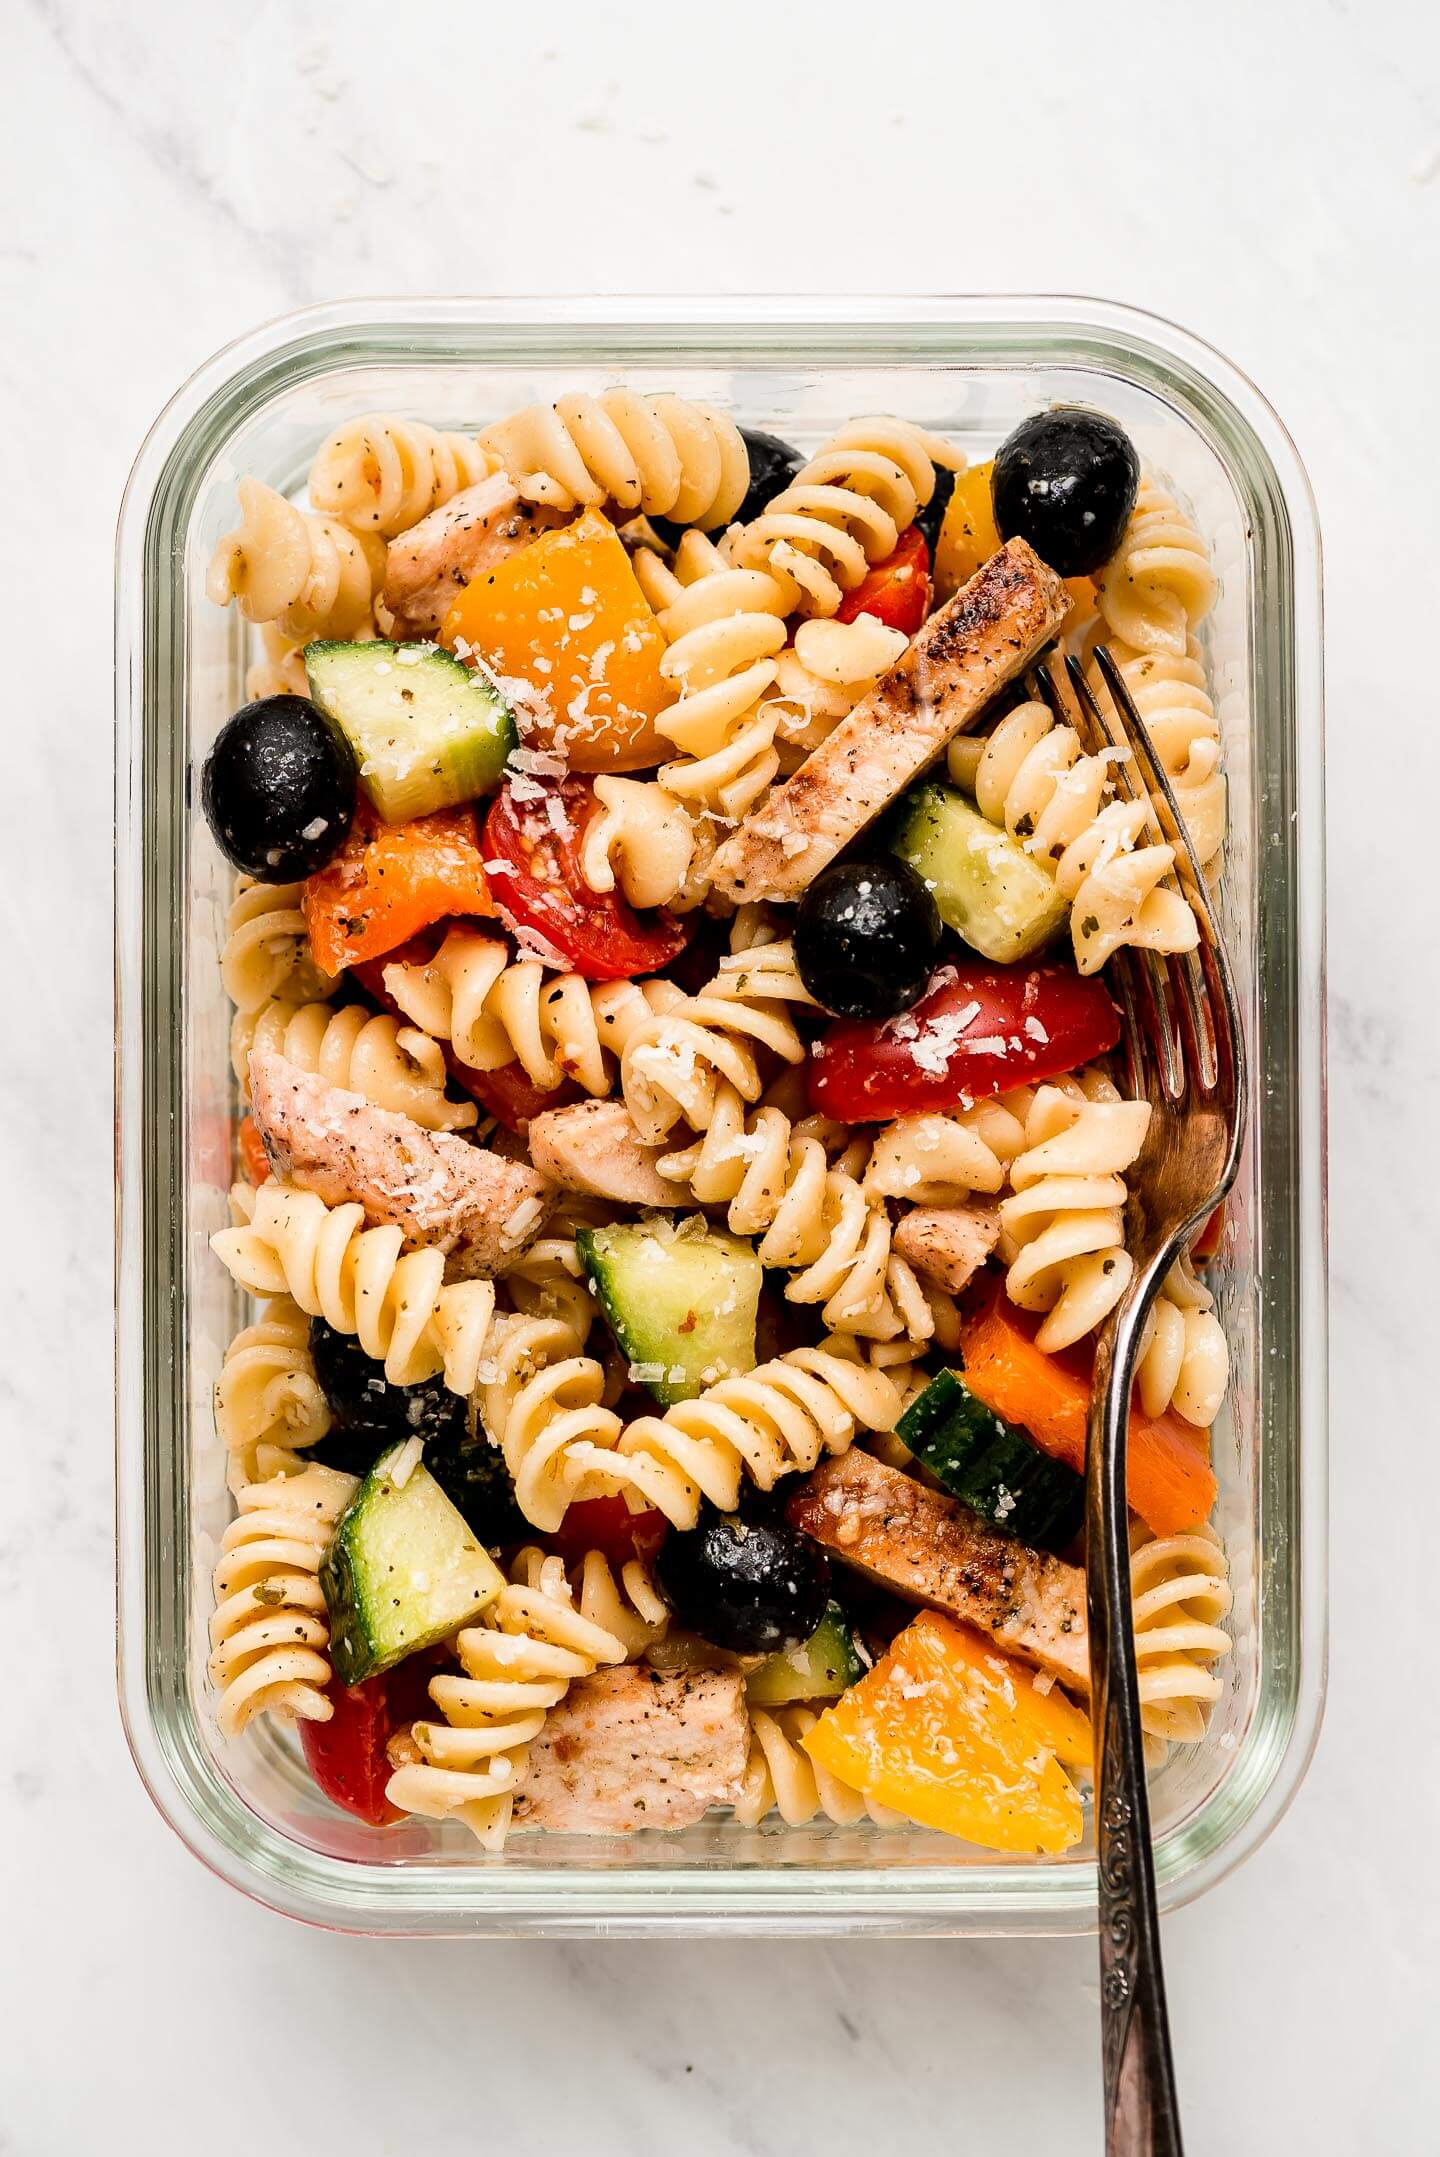 Pasta salad with chicken and vegetables in a glass meal prep container.